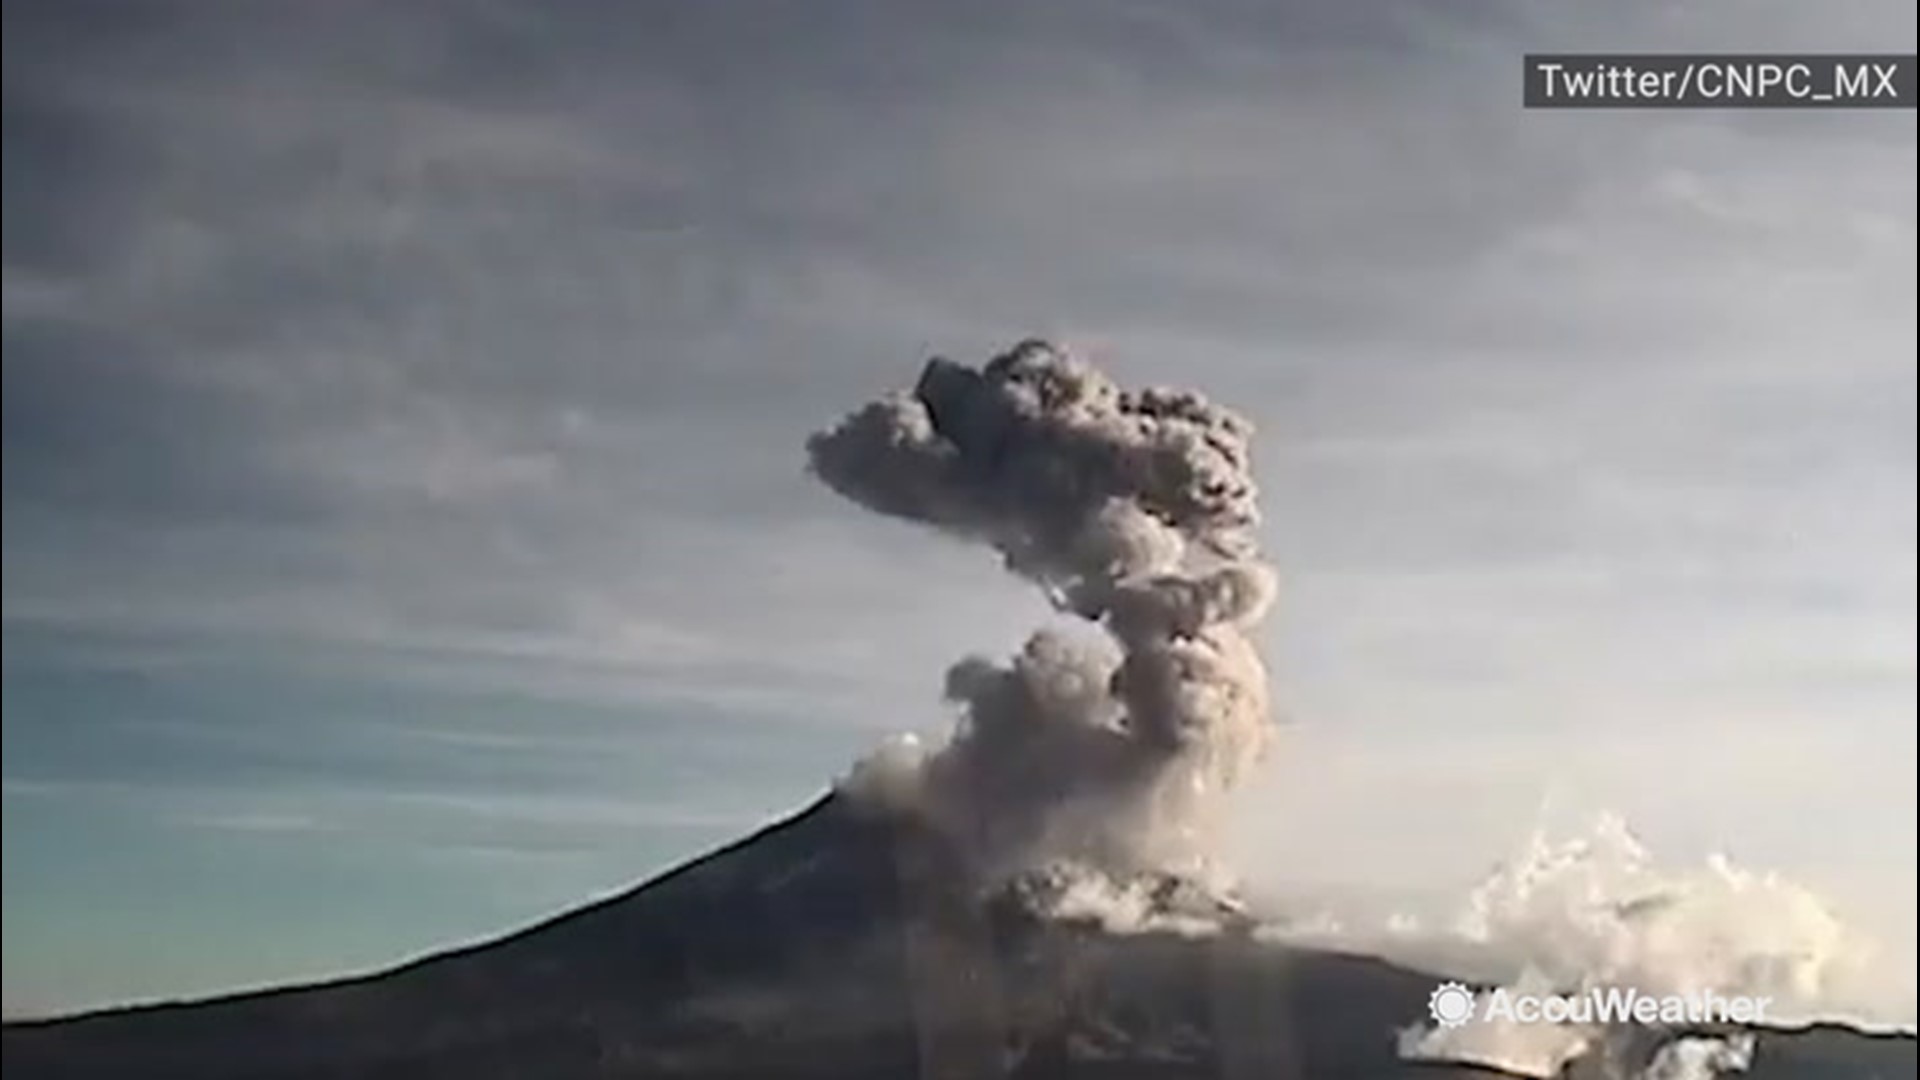 Mexico's Popocatepetl volcano erupted on Nov. 6, spewing ash and debris into the sky. The volcano is one of the most active in Mexico.